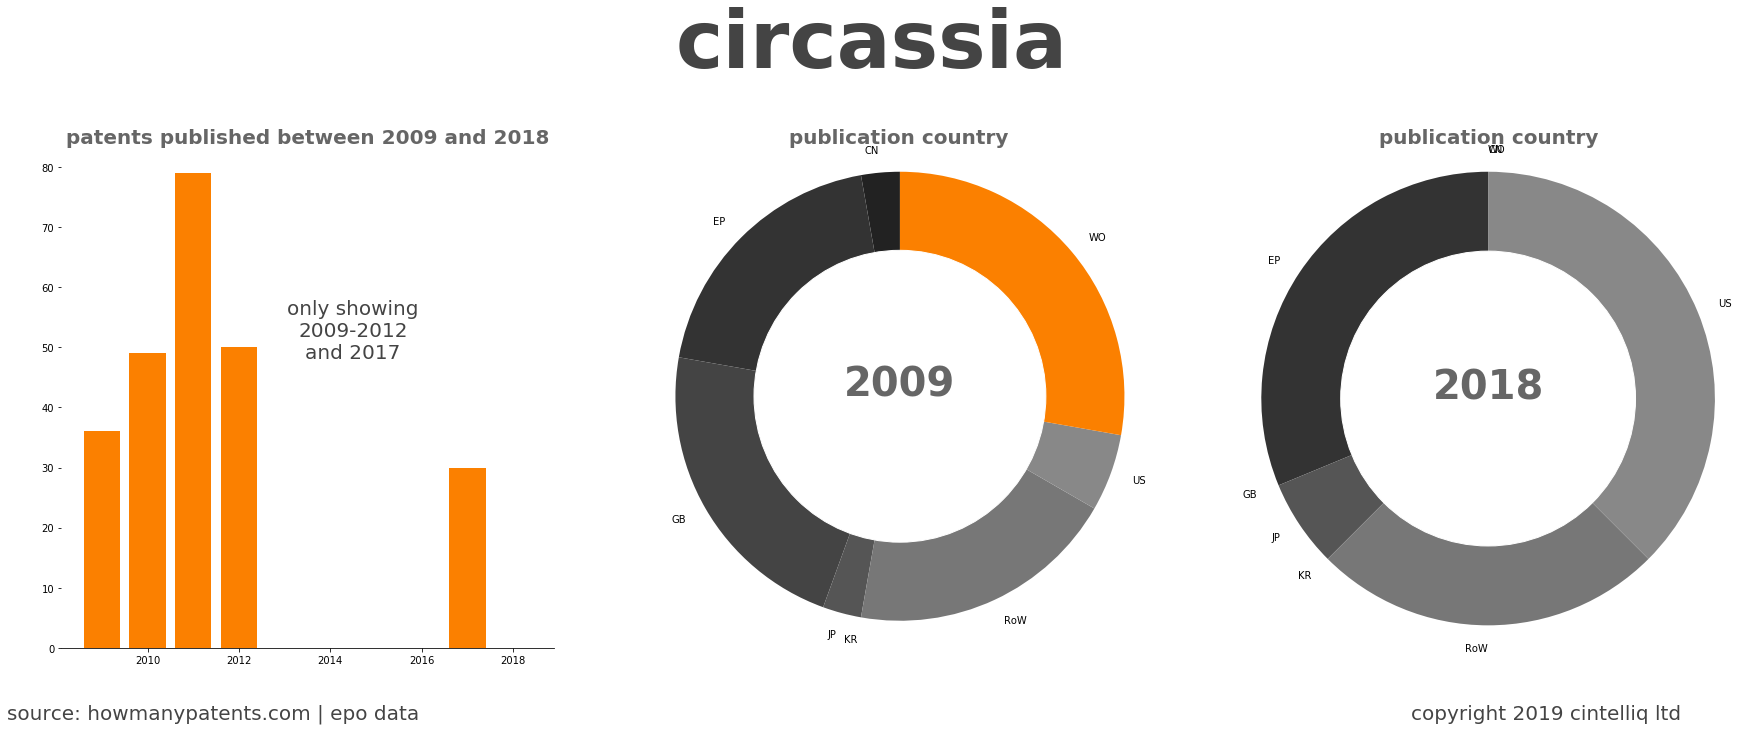 summary of patents for Circassia